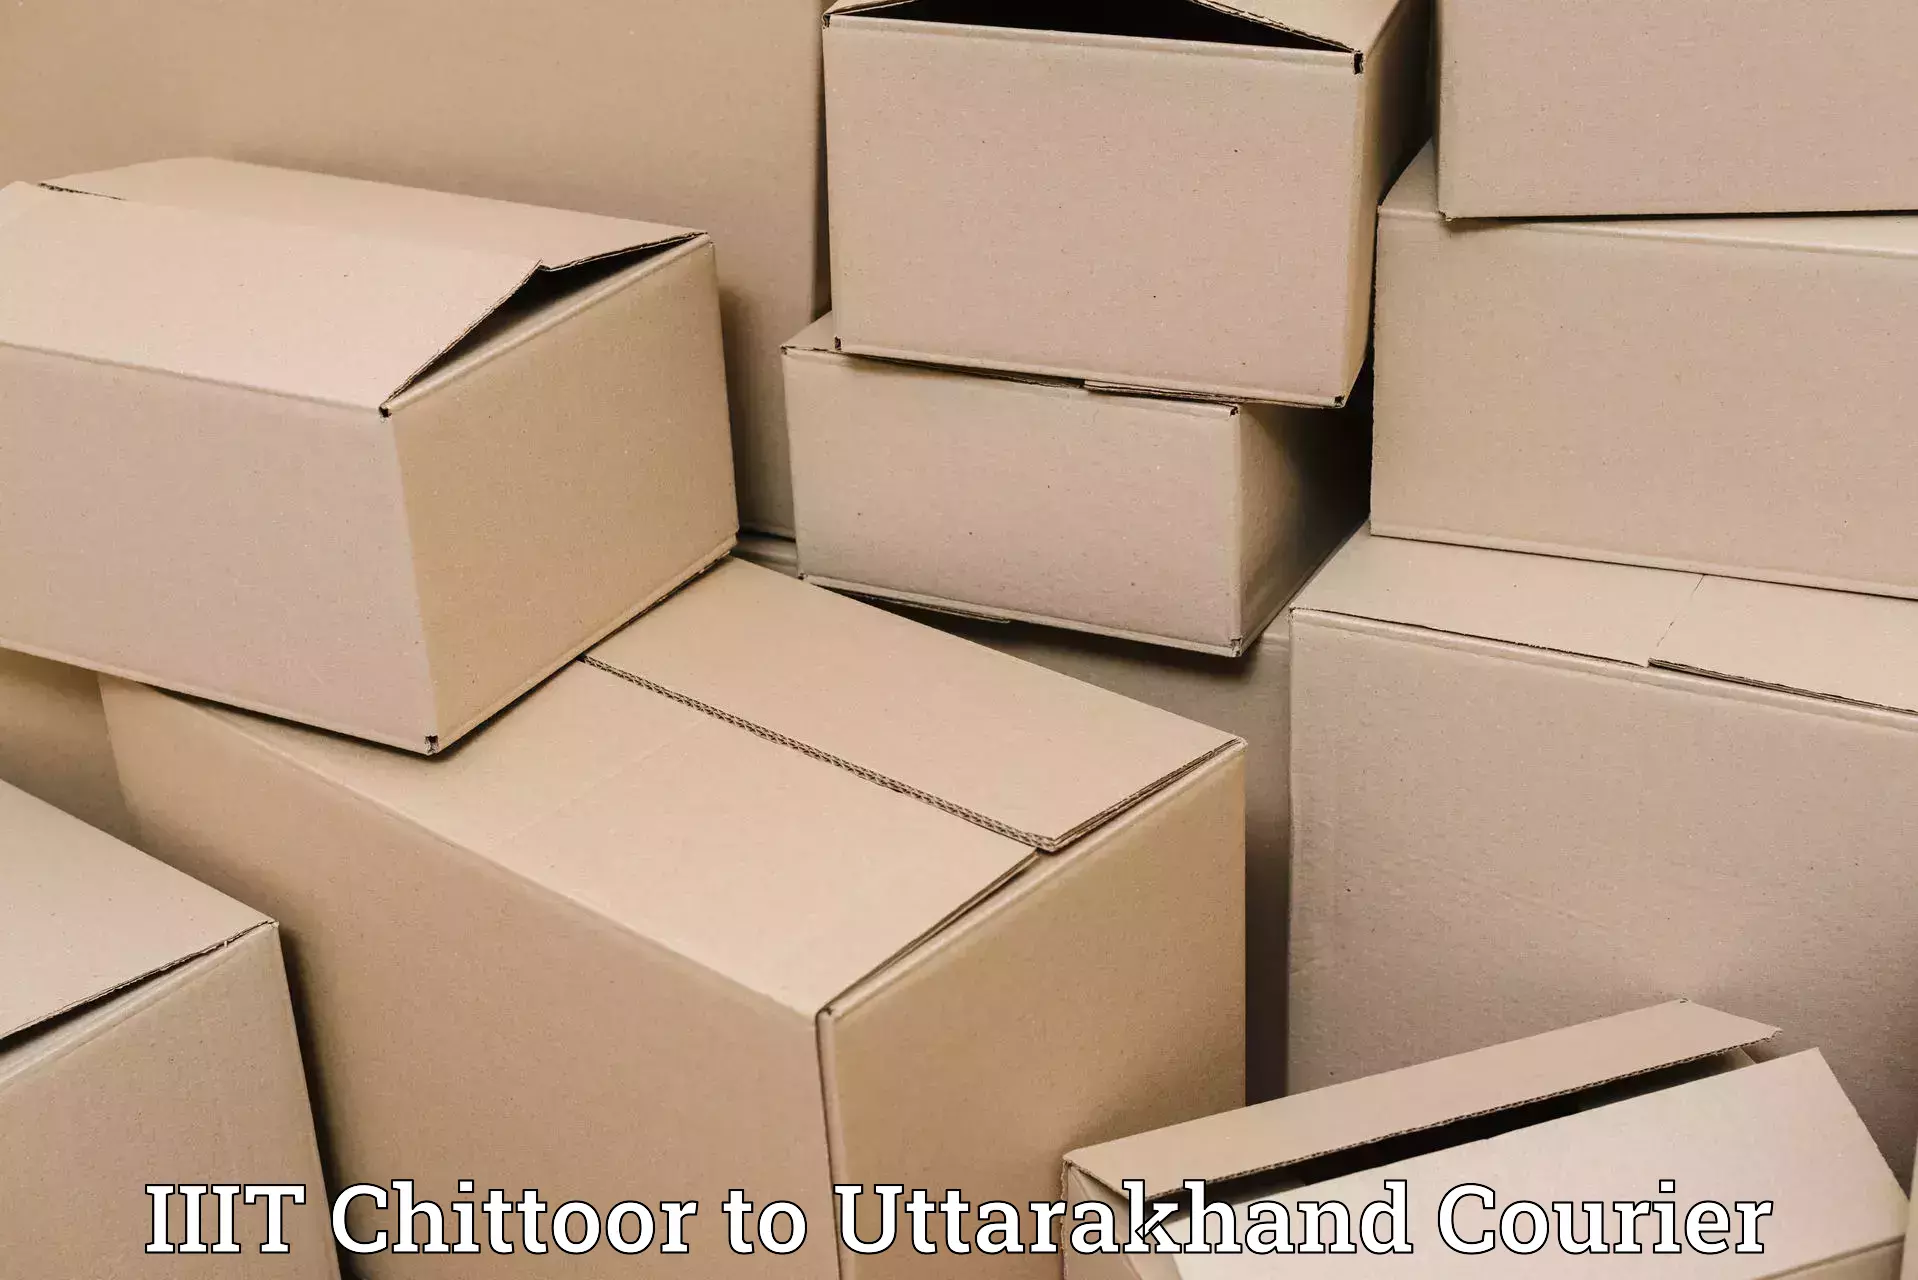 Same-day delivery options IIIT Chittoor to Uttarakhand